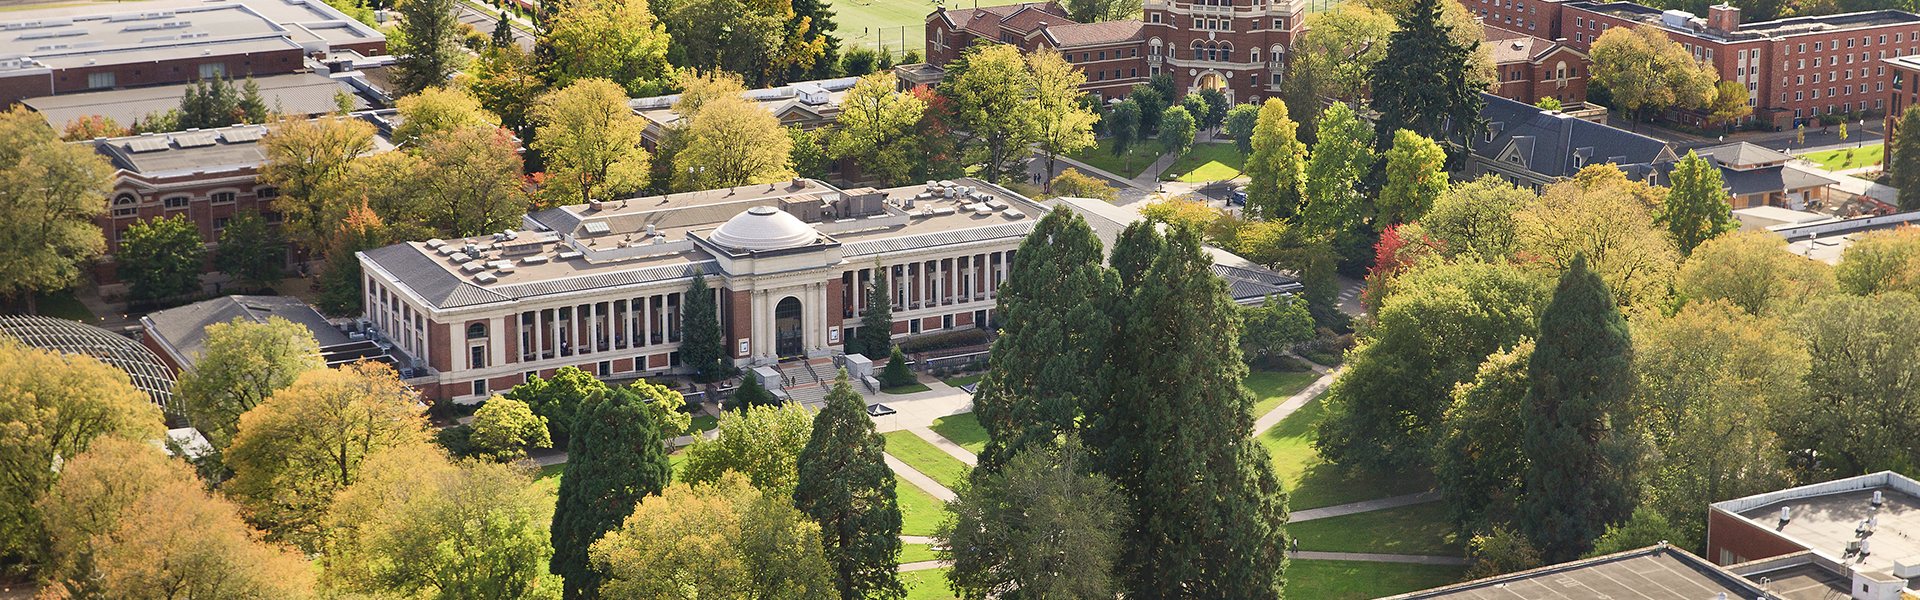 Aerial View of the OSU campus in Corvallis with Memorial Union in the shot, trees surrounding